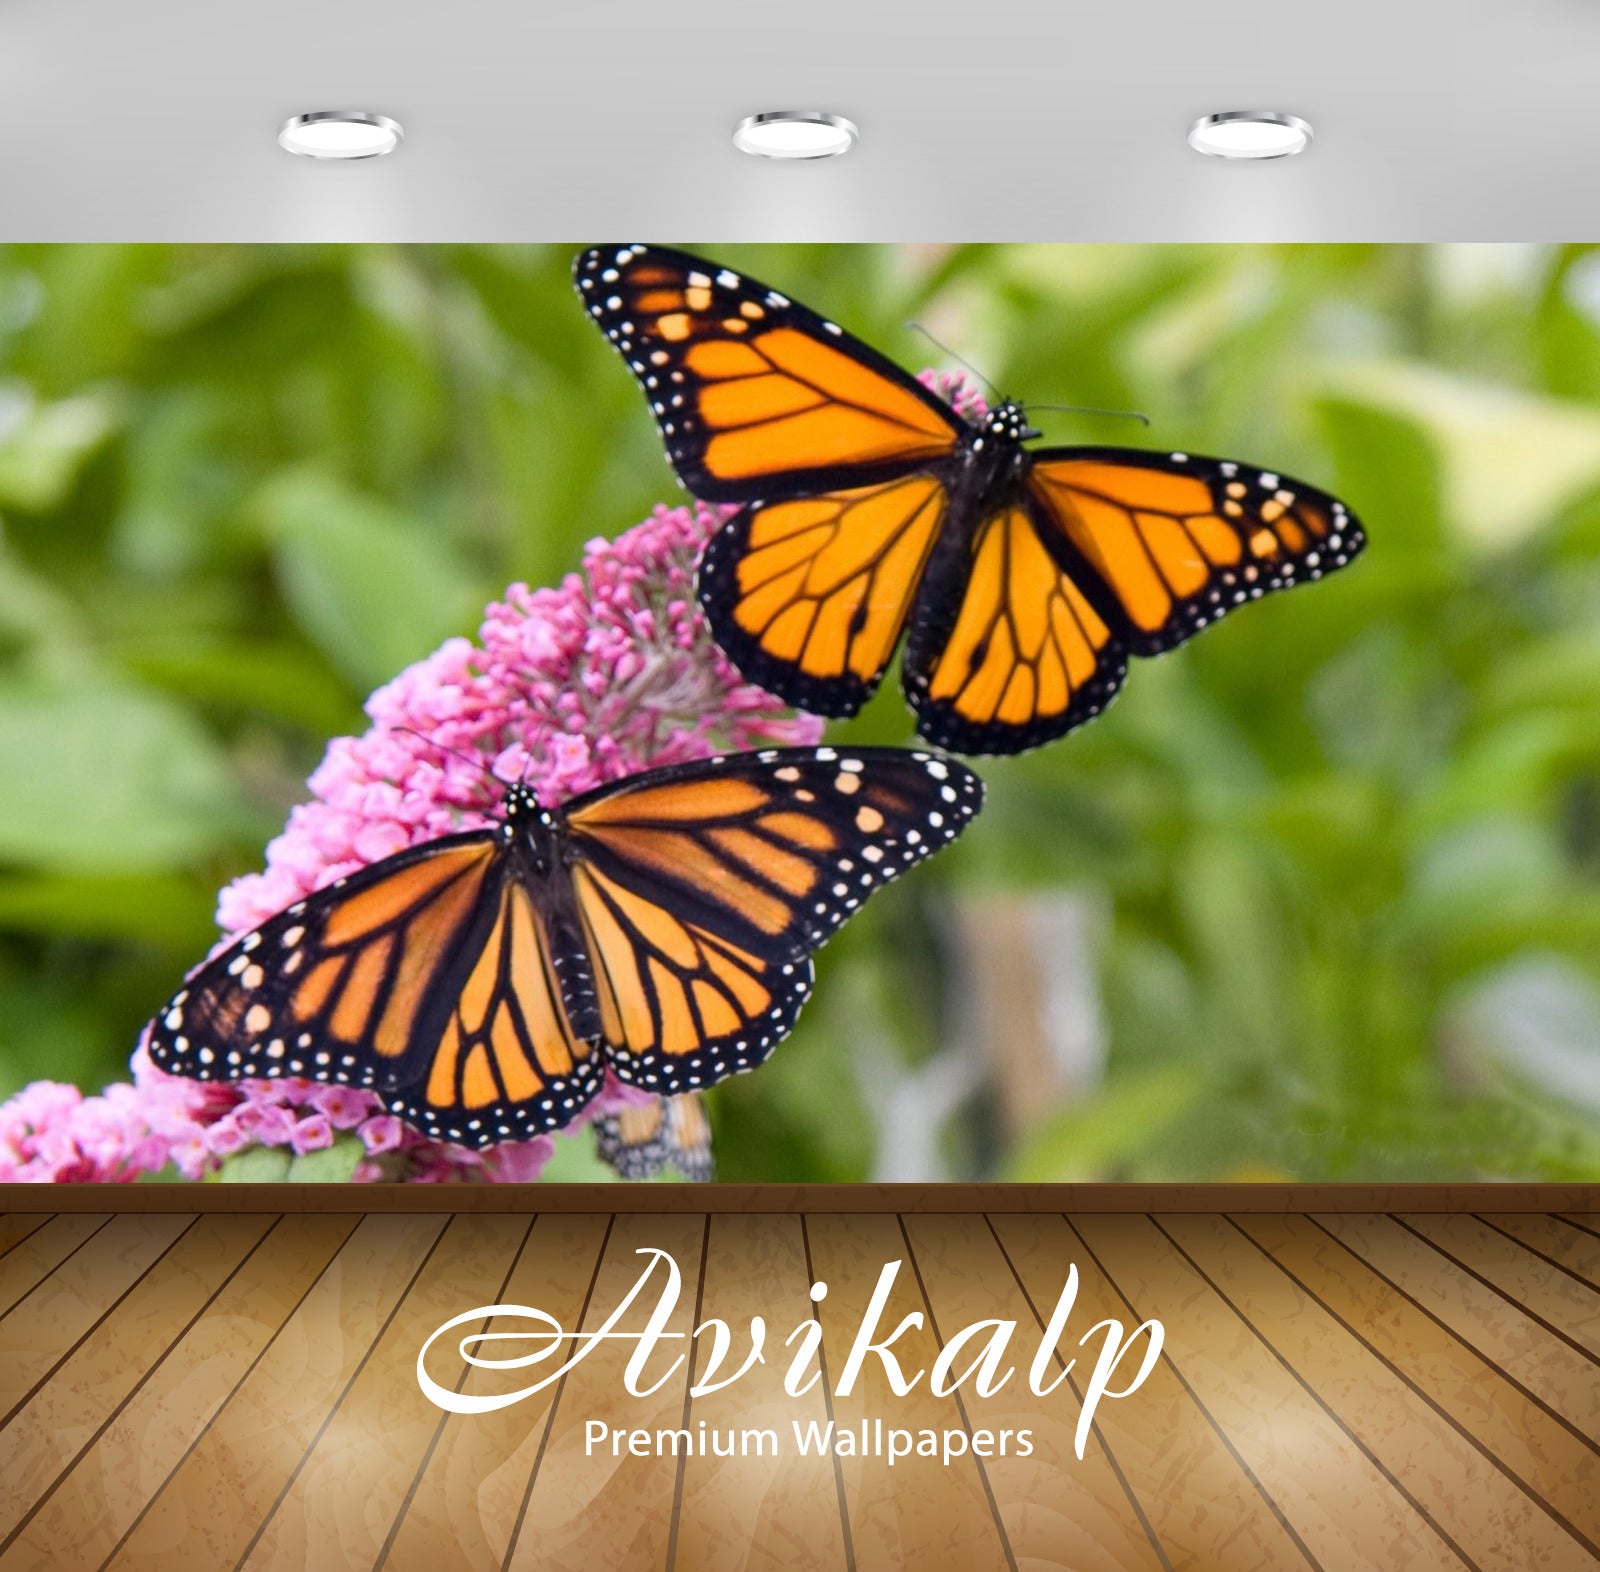 Avikalp Exclusive Awi2818 Male And Female Monarch Butterfly On Pink Flowers Full HD Wallpapers for L